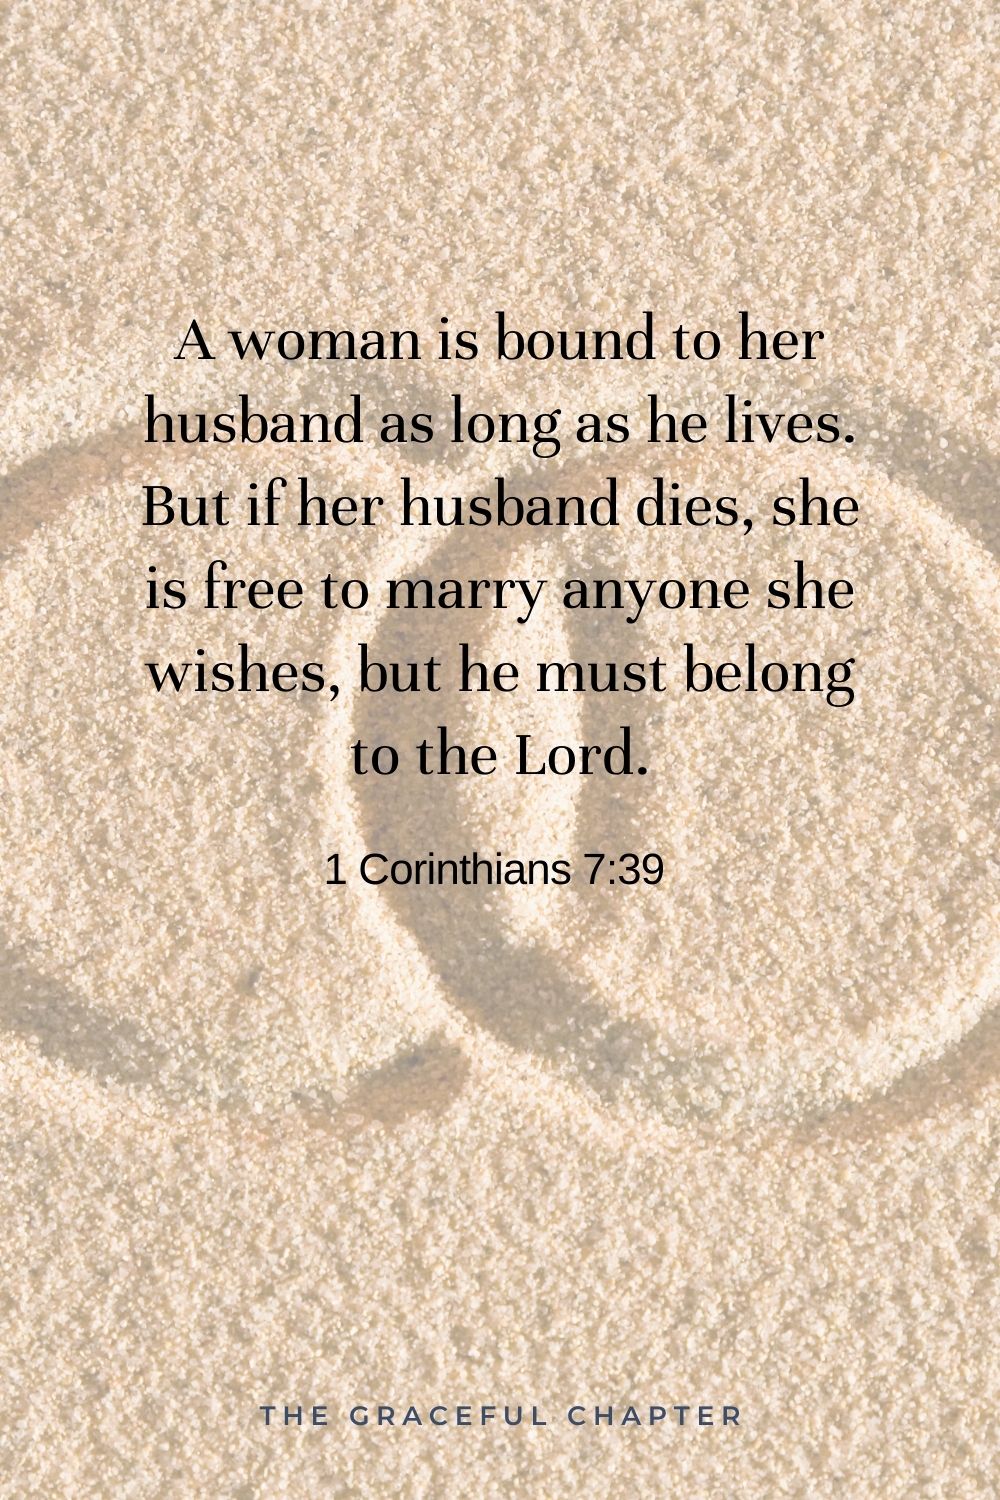 A woman is bound to her husband as long as he lives. But if her husband dies, she is free to marry anyone she wishes, but he must belong to the Lord. 1 Corinthians 7:39 